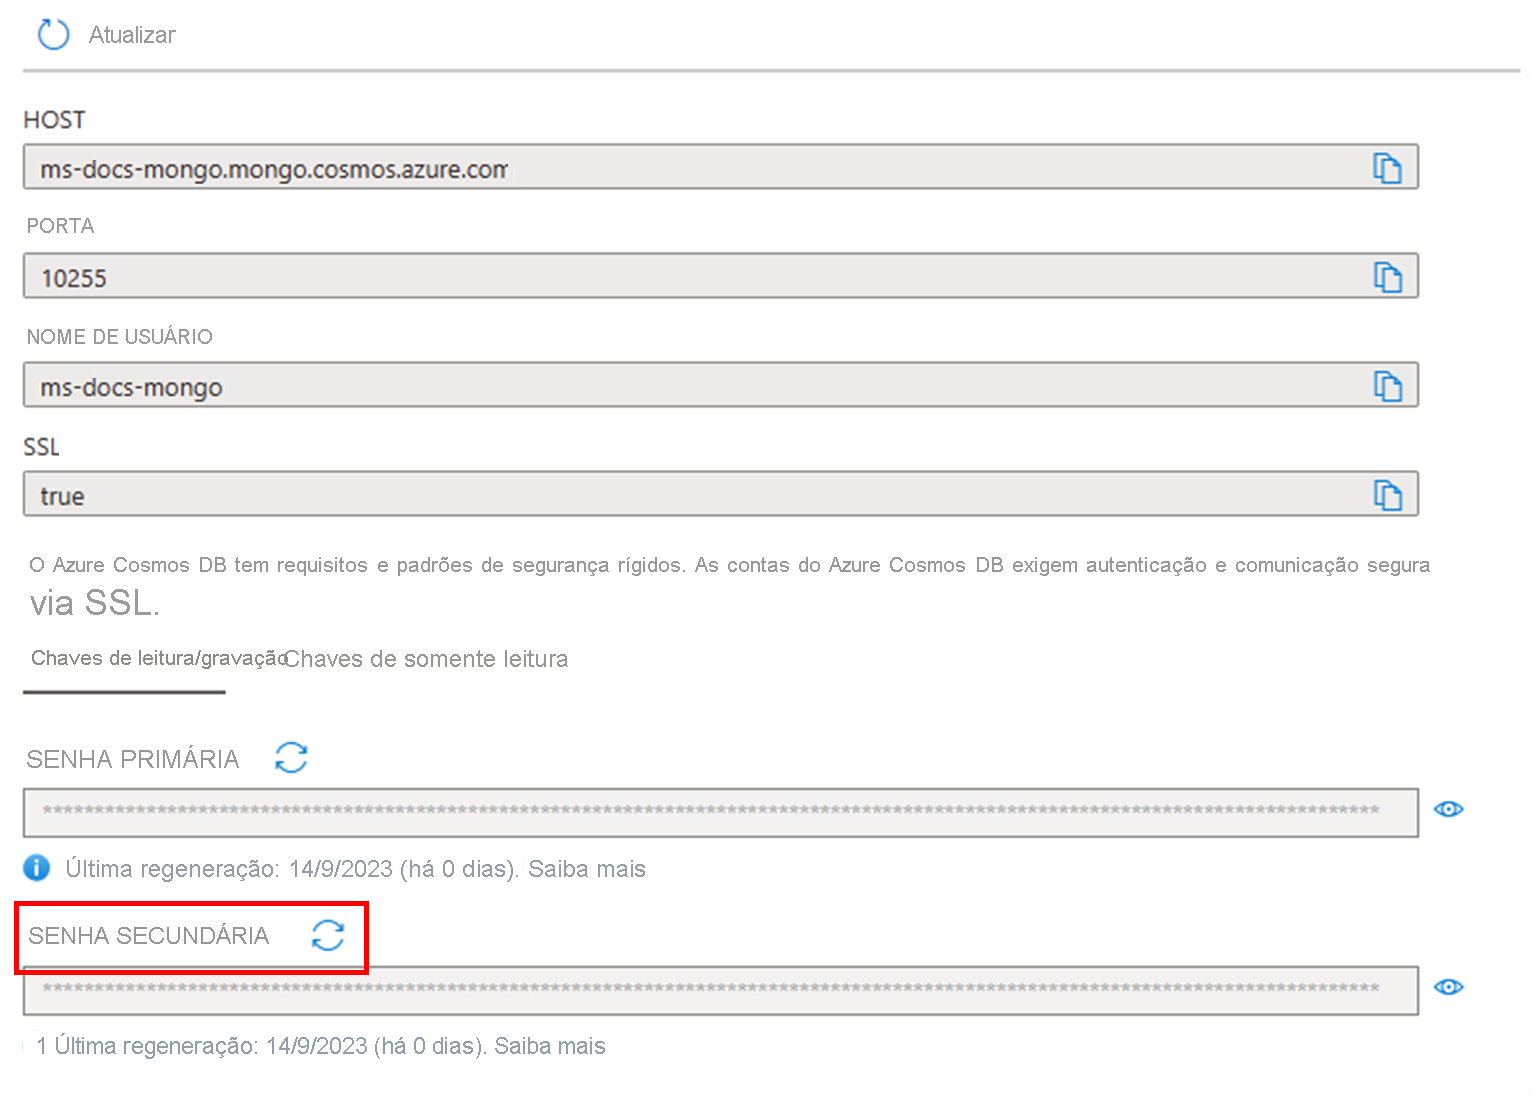 Screenshot showing how to regenerate the secondary key in the Azure portal when used with MongoDB.